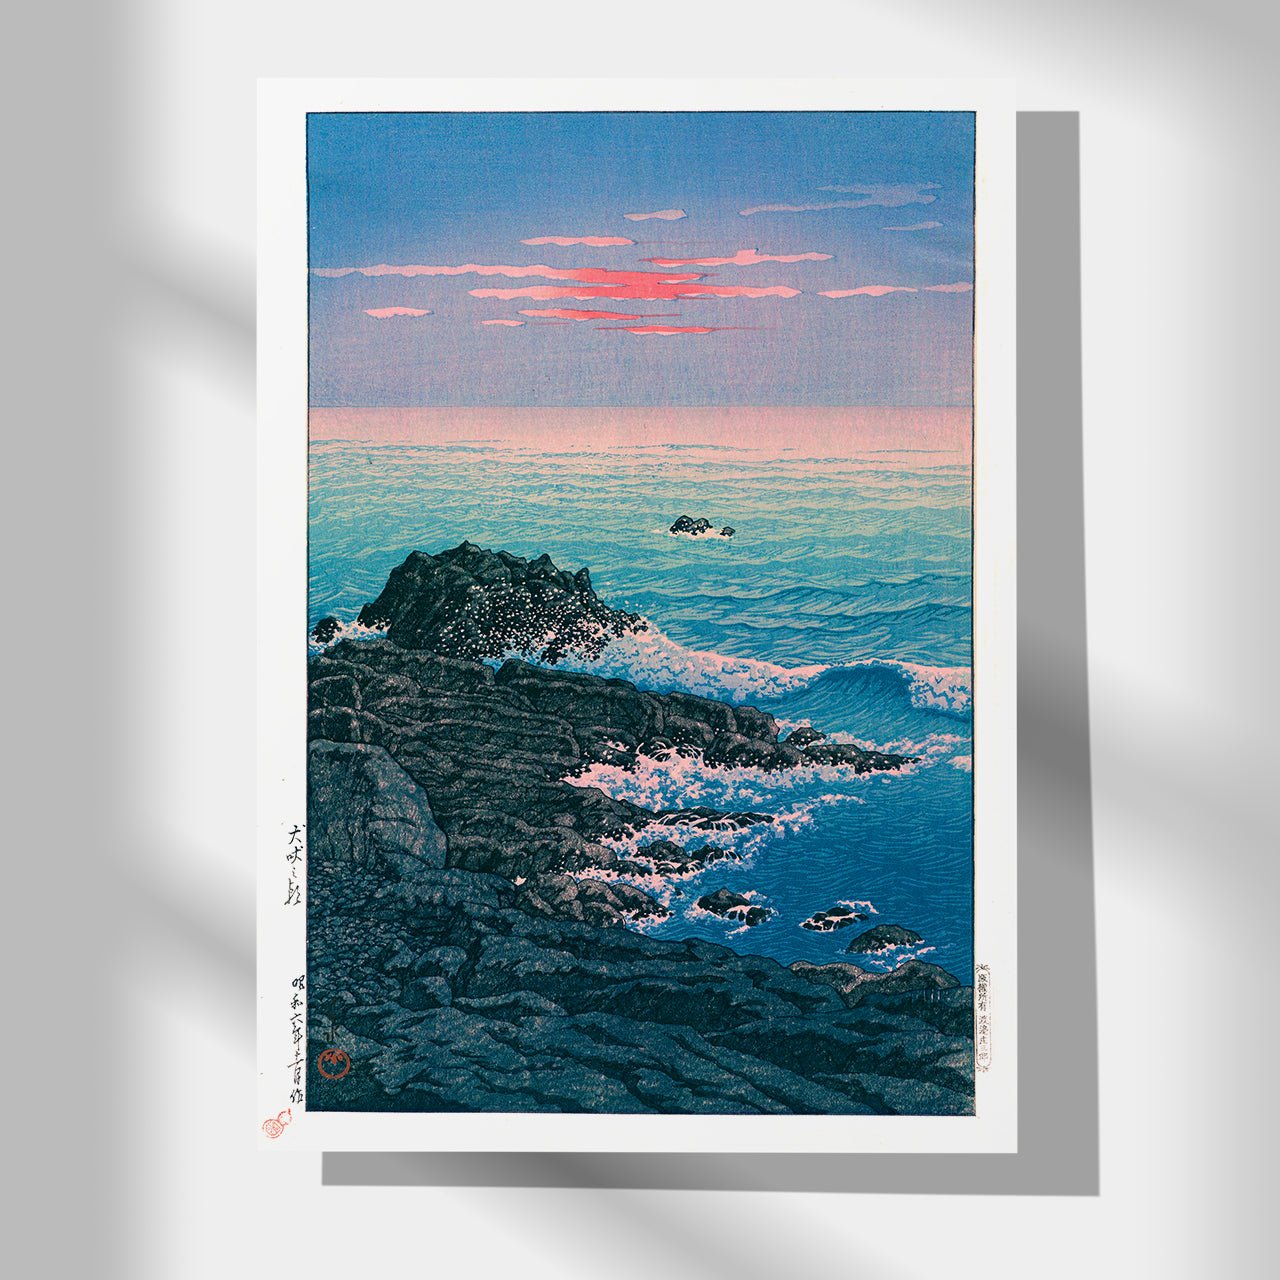 A serene Japanese Art Poster by Kawase Hasui capturing the ocean and rocks at dawn, with pink sky and crashing whitecaps.